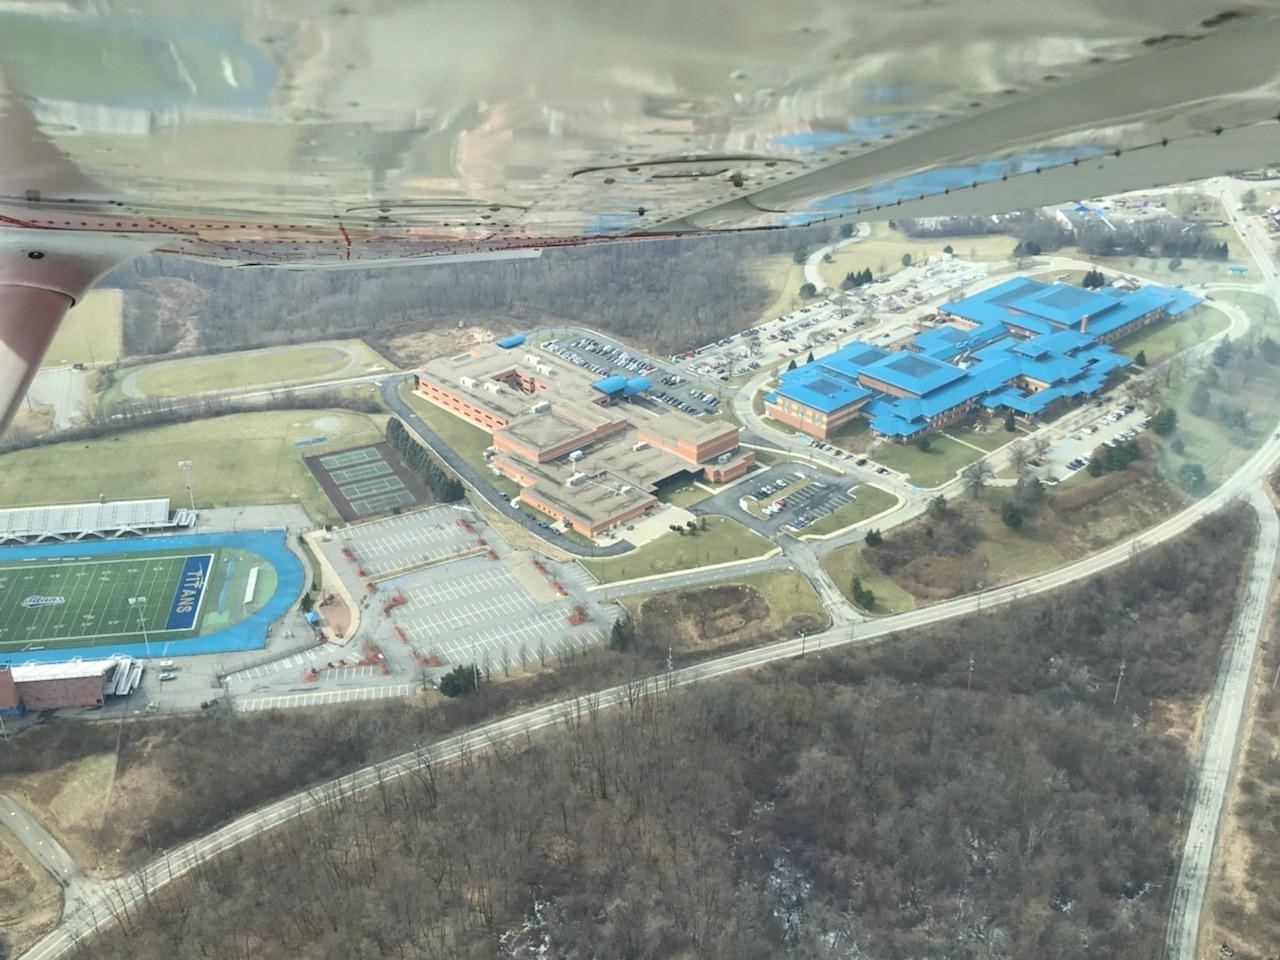 WM campus view from airplane